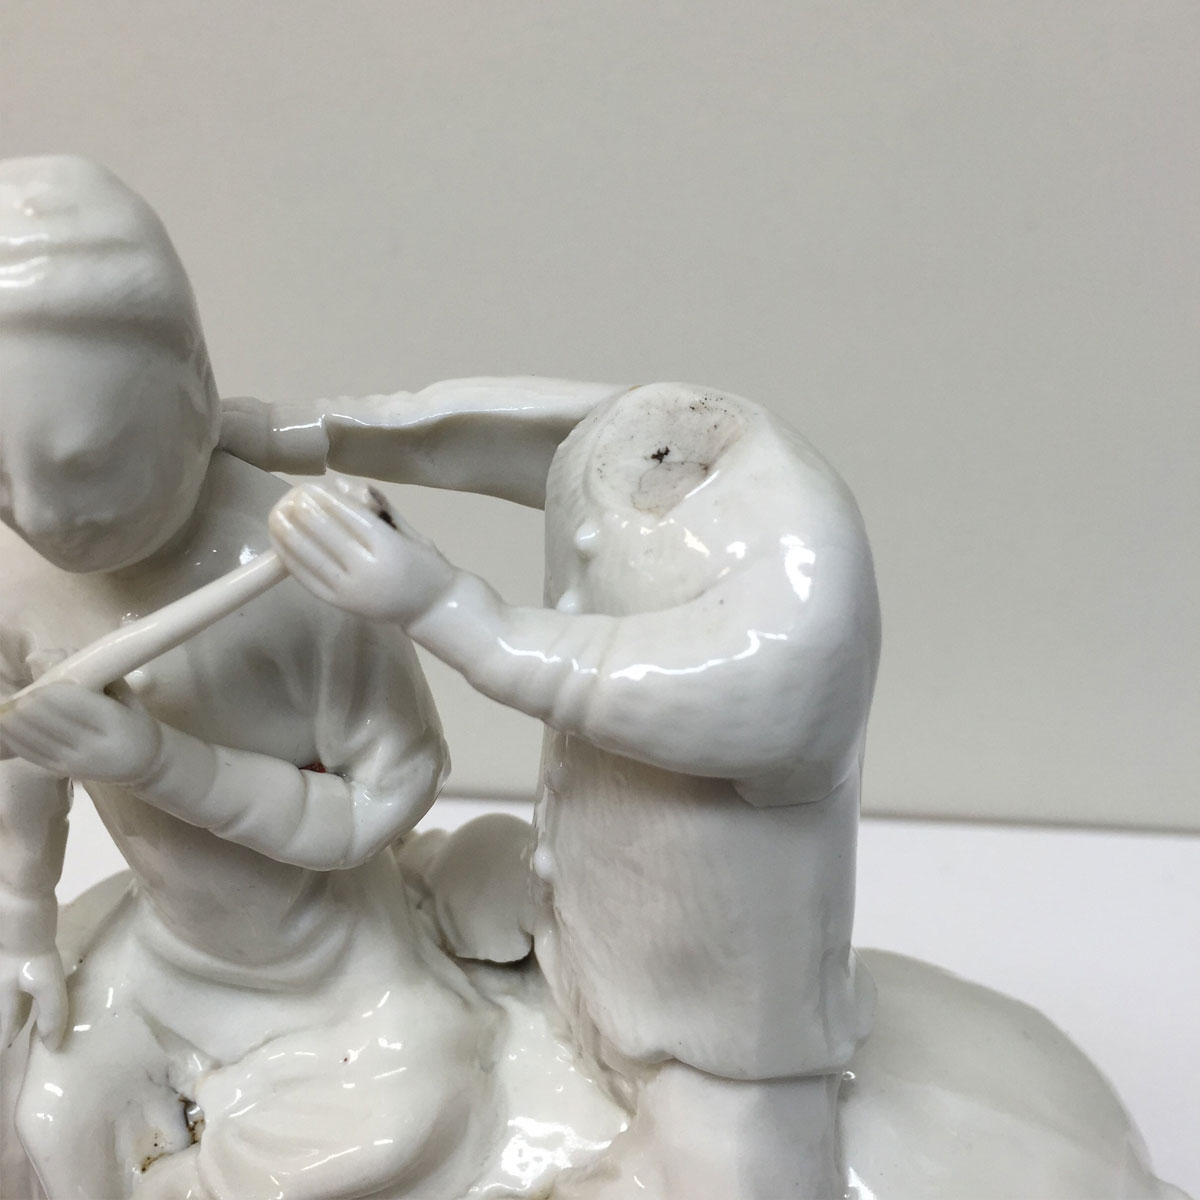 Two porcelain figures, one is missing a head